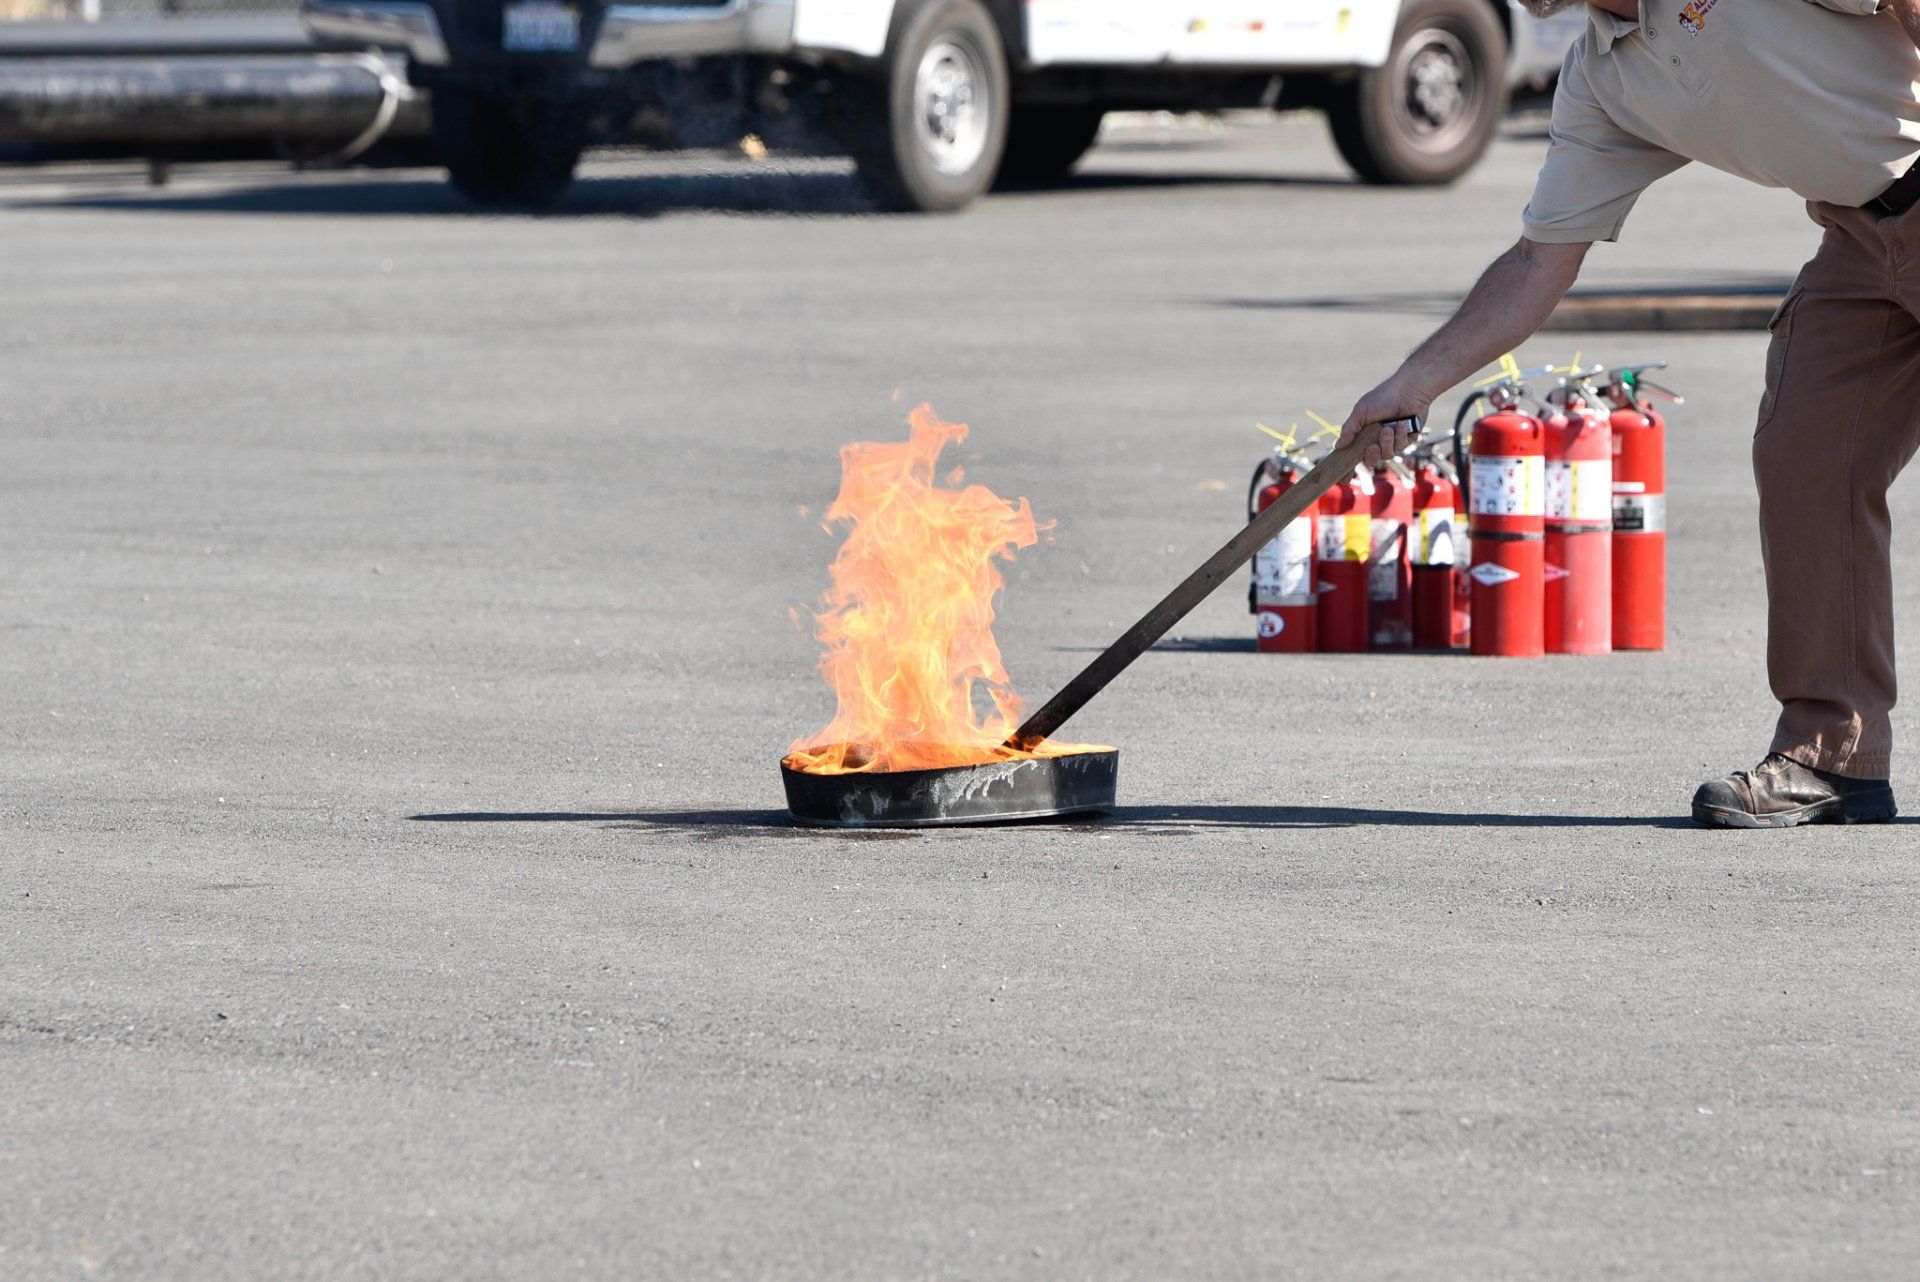 Fire Extinguisher Safety Training  Class picture before  with fire burning in container